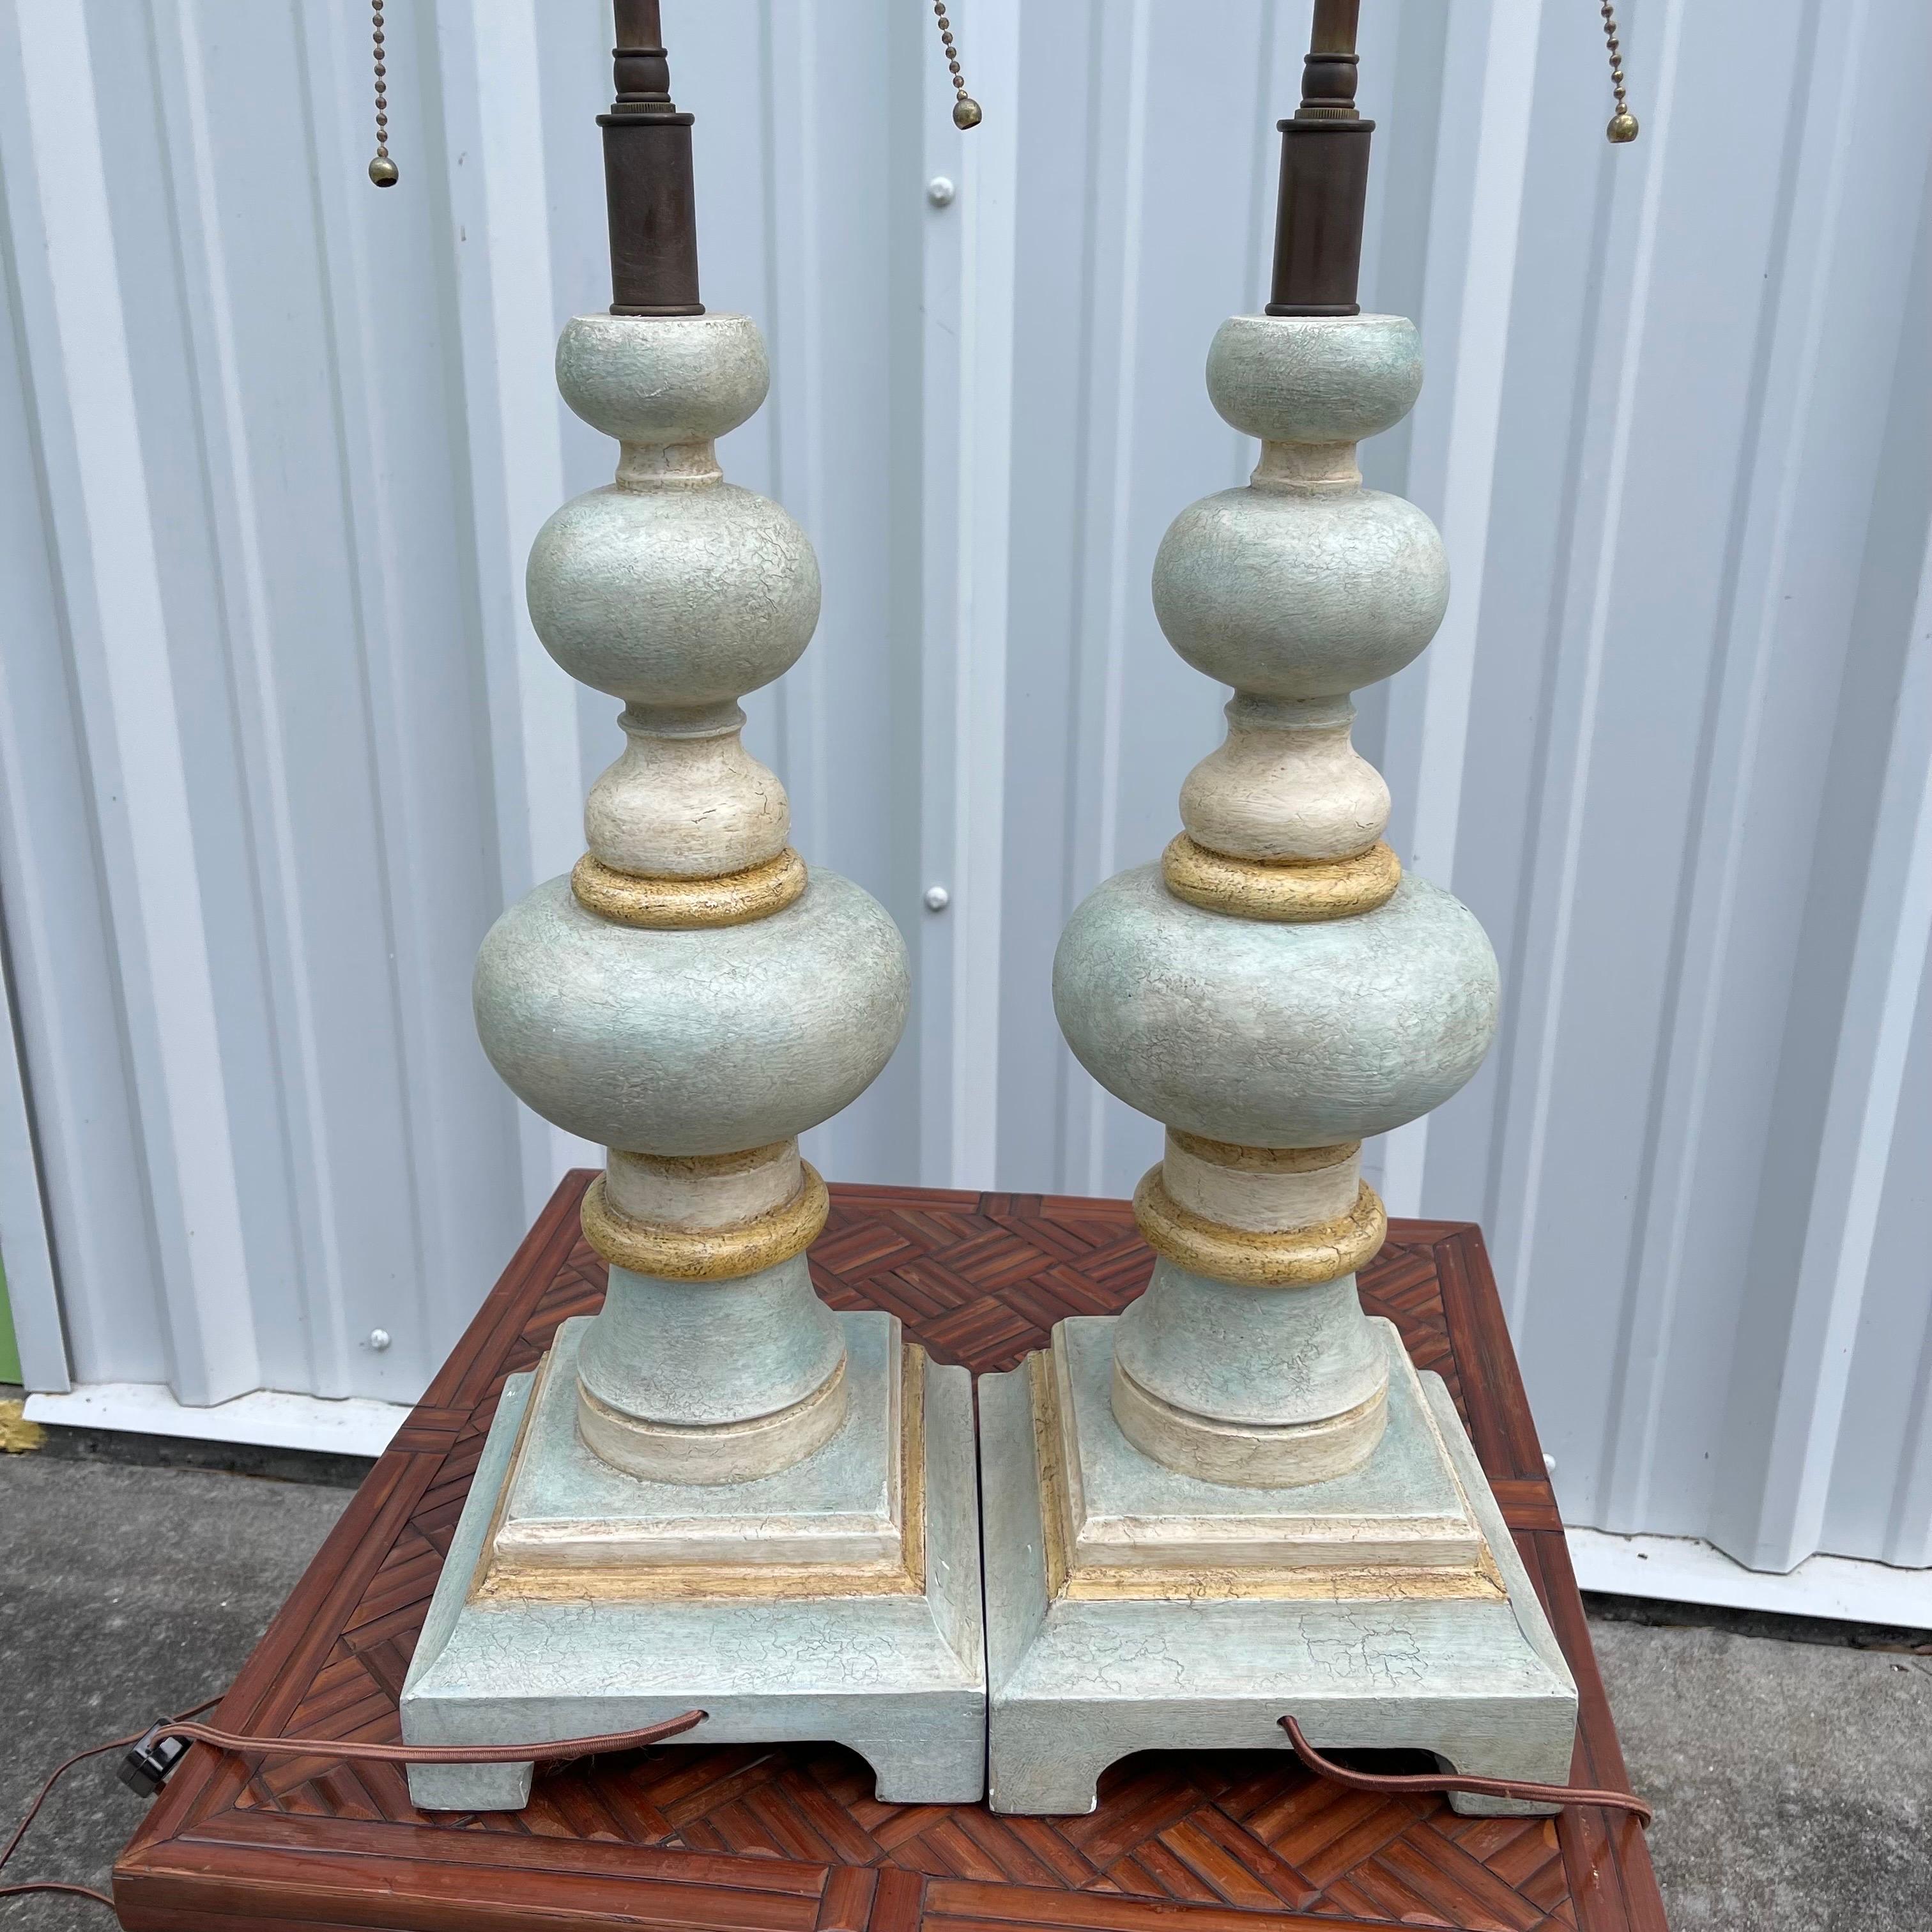 Hollywood Regency Painted Patinated Carved Wood Bobbin Tables Lamps, a Pair For Sale 7